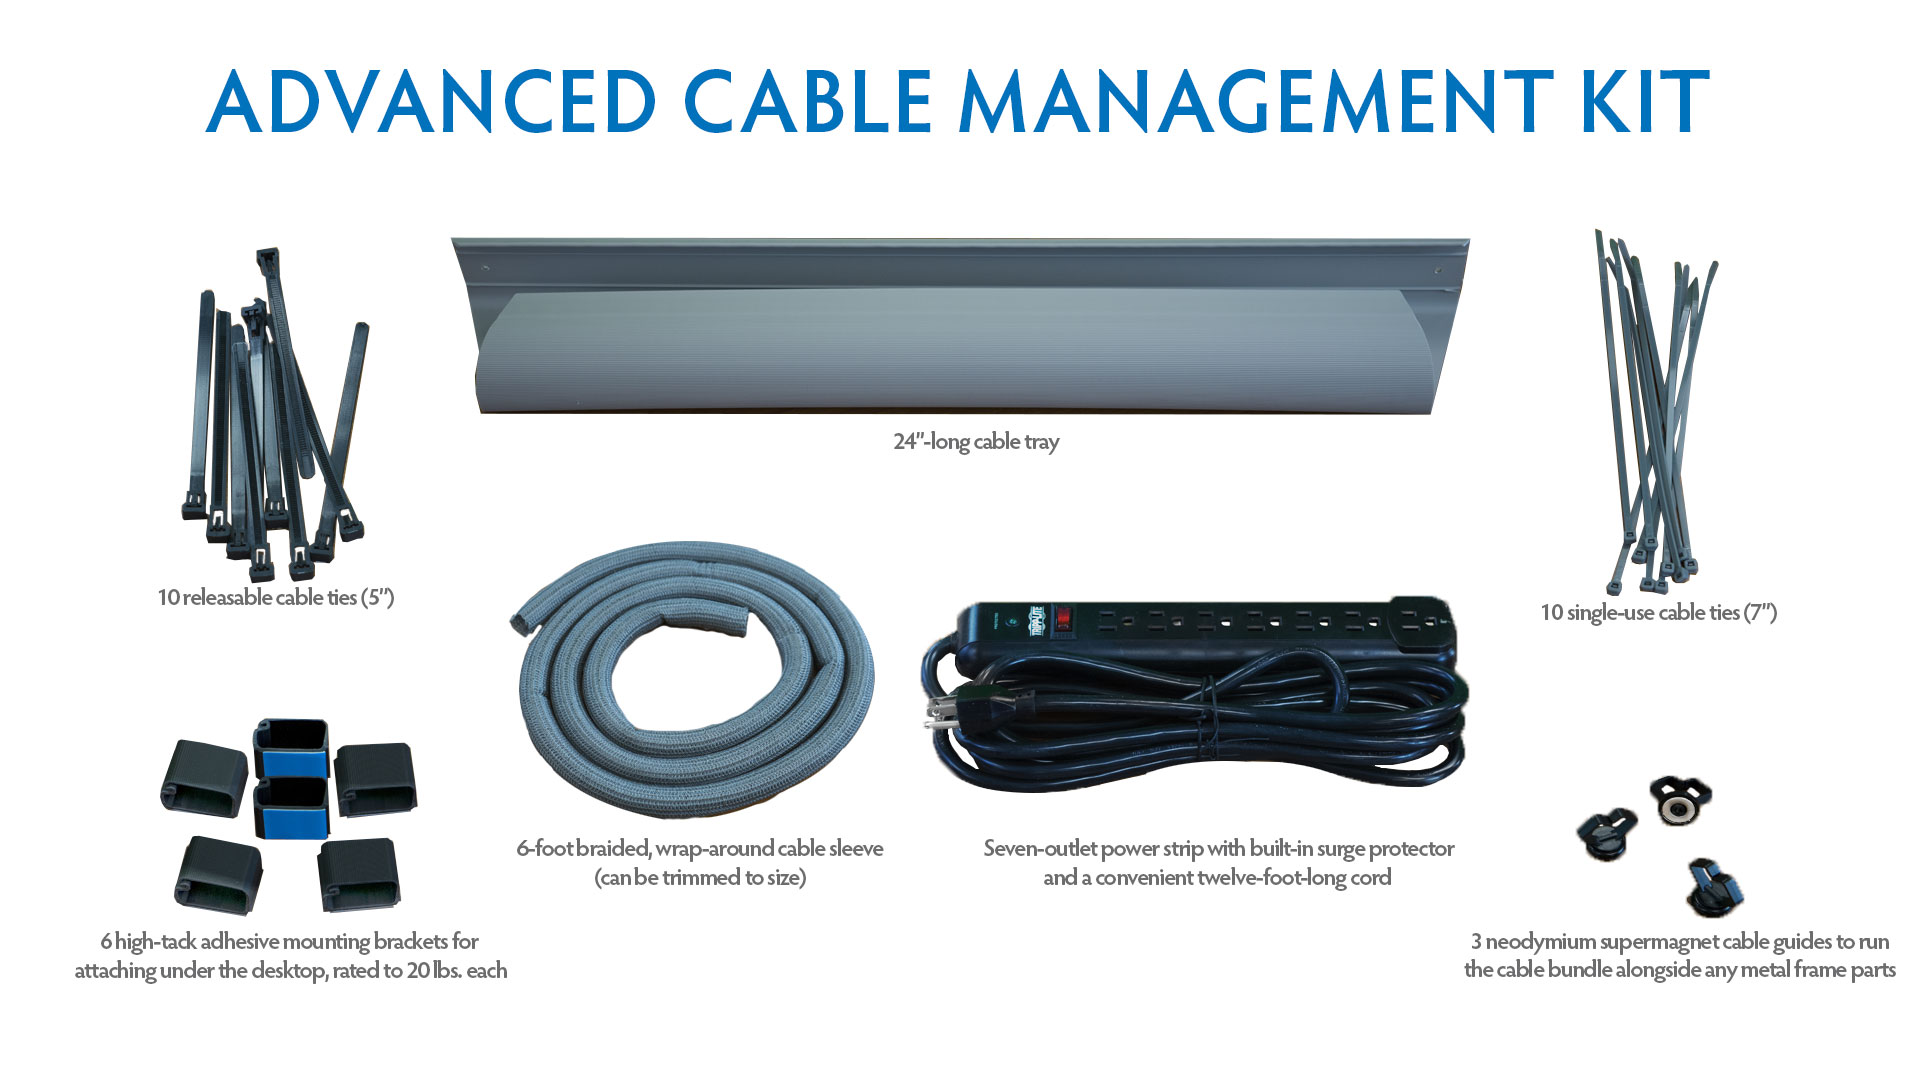 iMovR Cable Management Kit Review